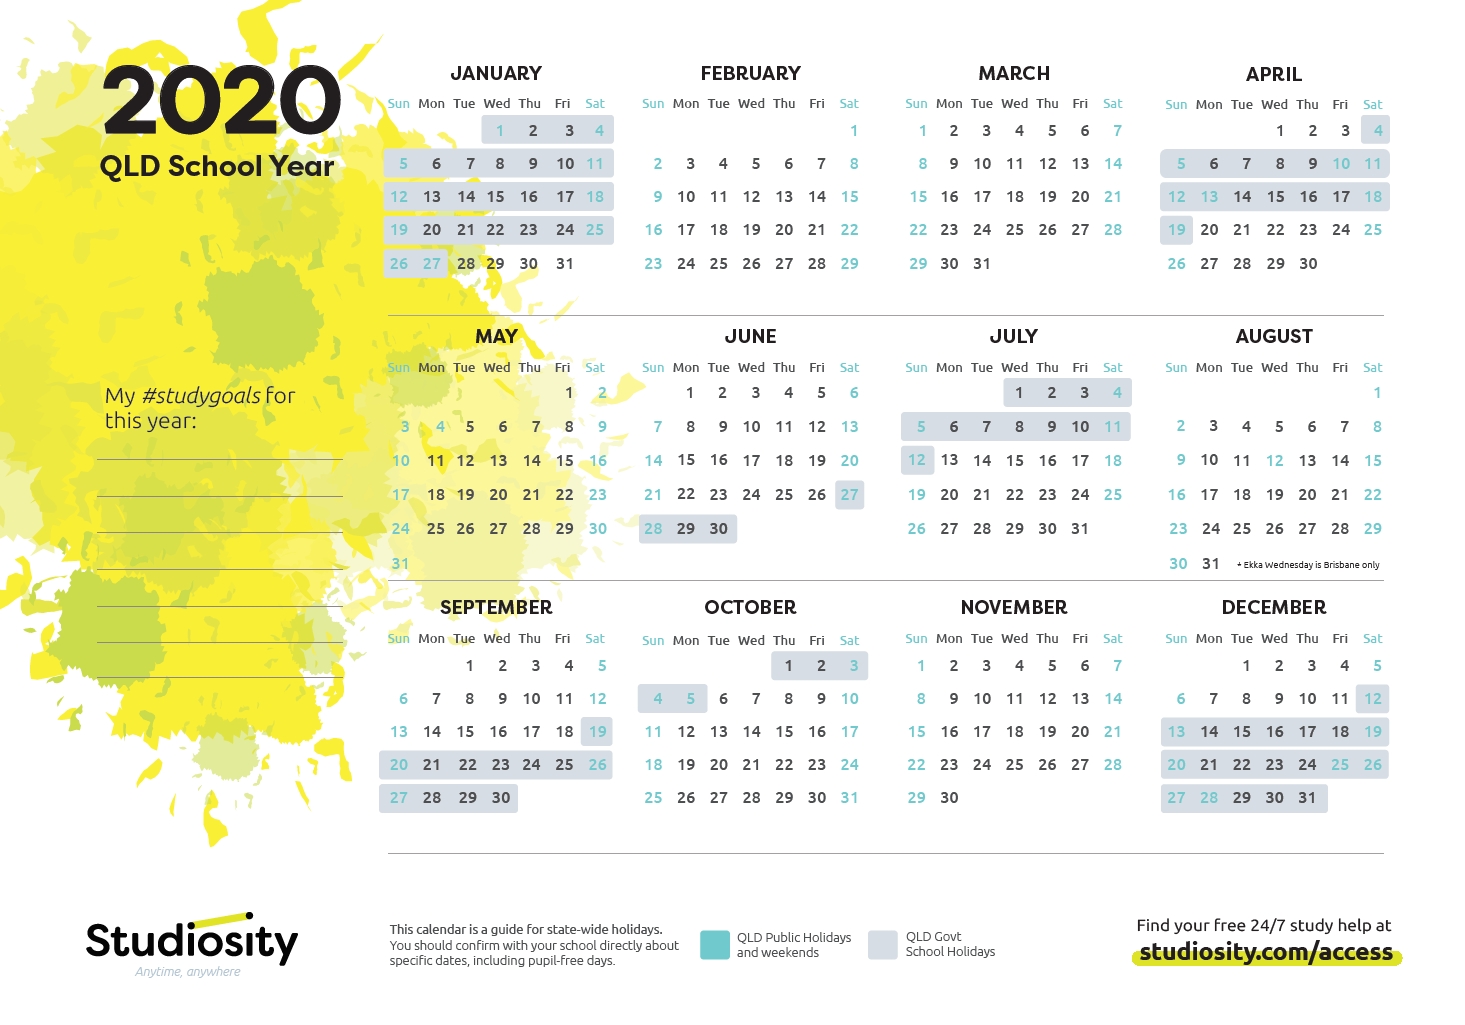 School Terms And Public Holiday Dates For Qld In 2020 Incredible Calendar For Year 2020 Queensland With All Holidays